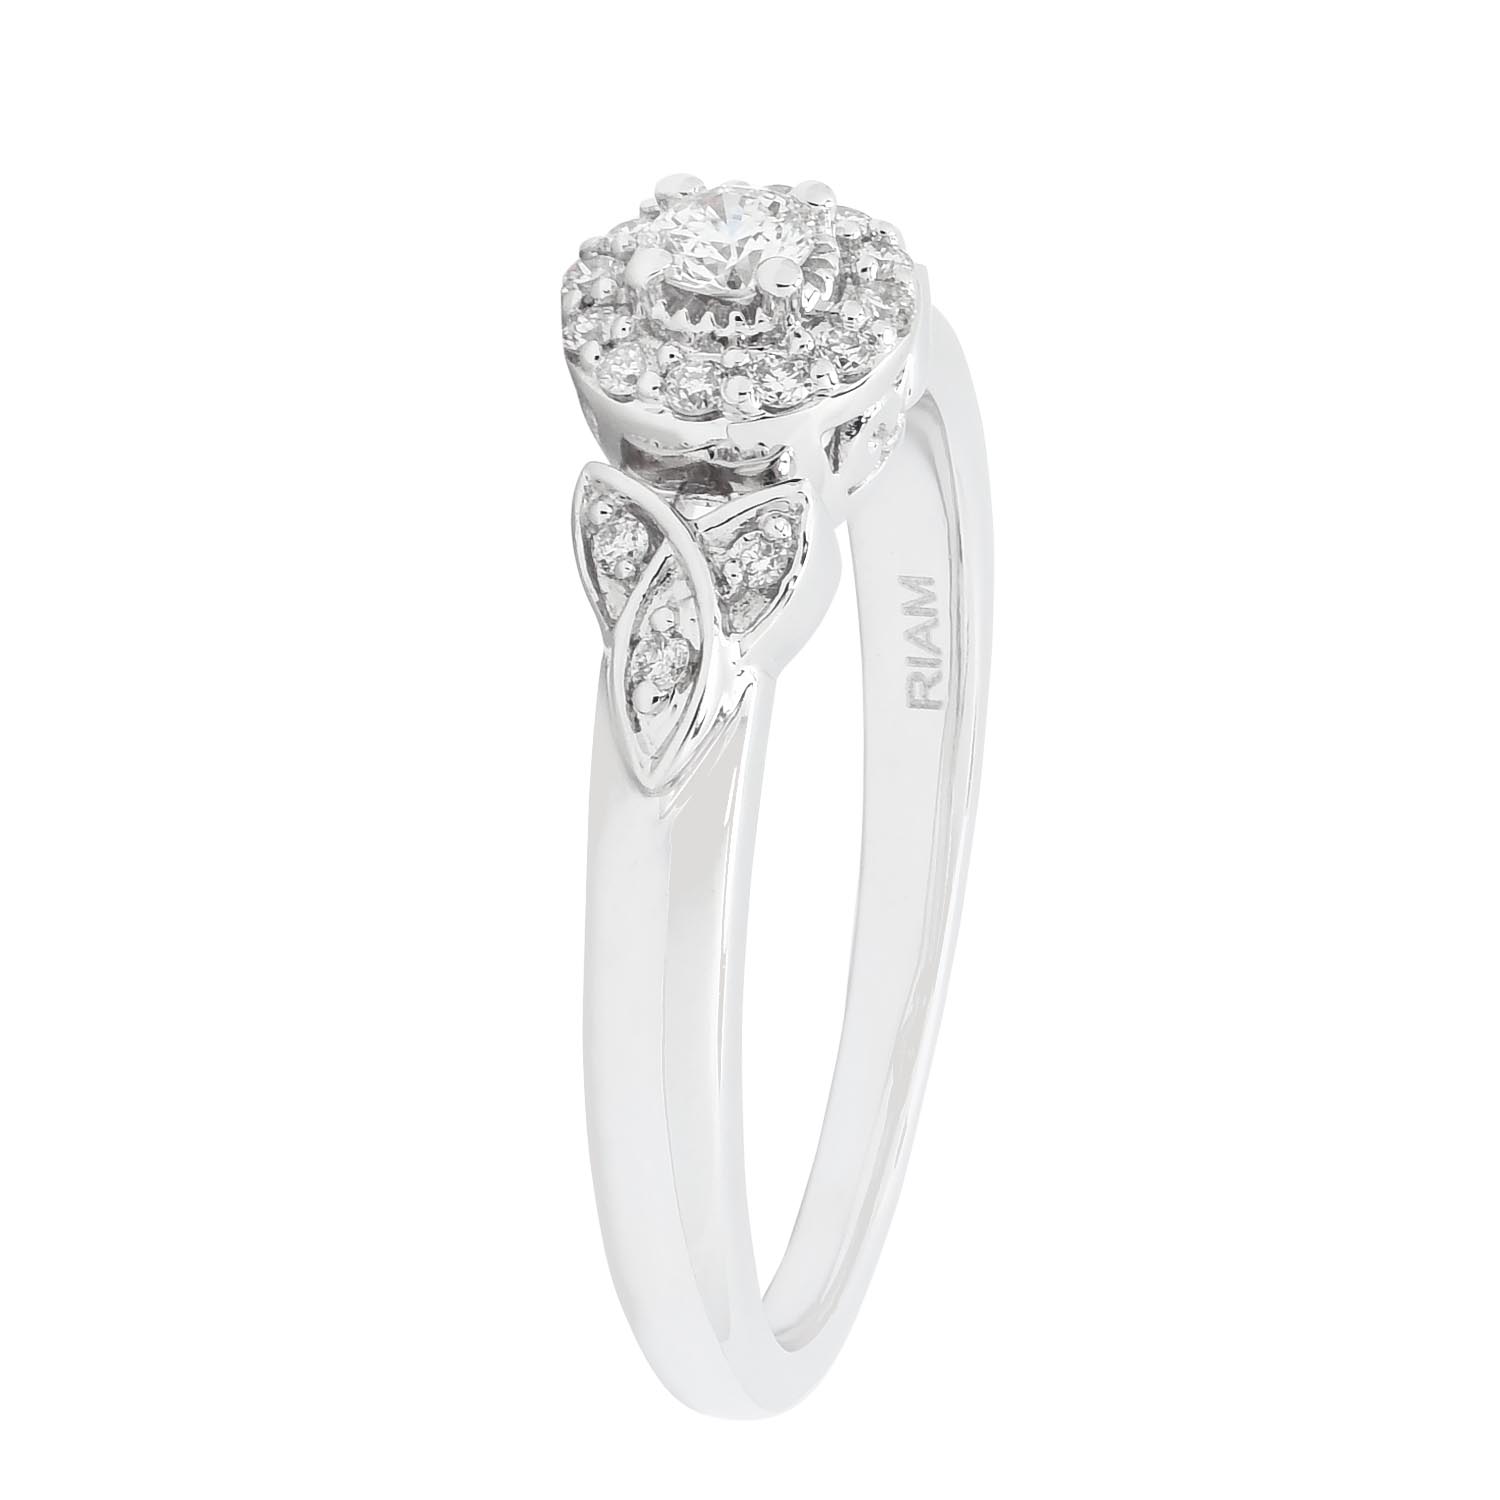 Northern Star Diamond Engagement Ring in 14kt White Gold (1/5ct tw)